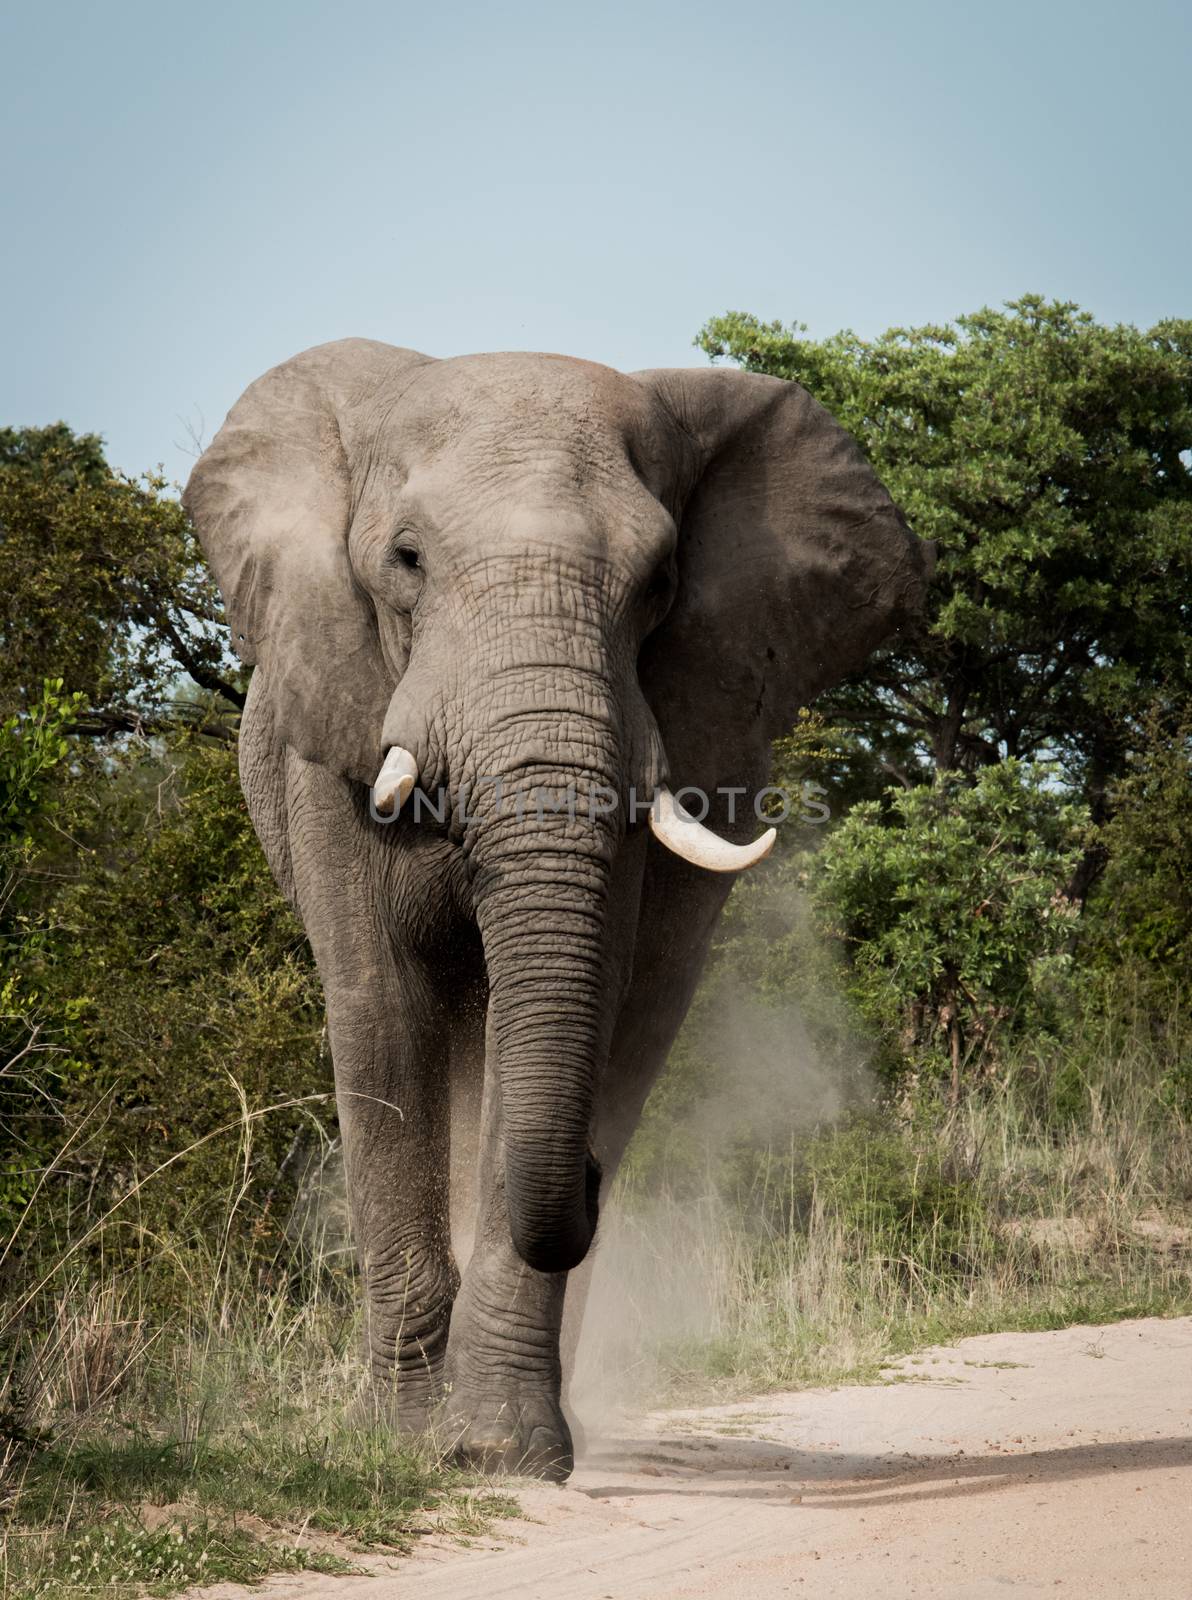 Elephant walking towards the camera in the Kruger National Park, South Africa. by Simoneemanphotography